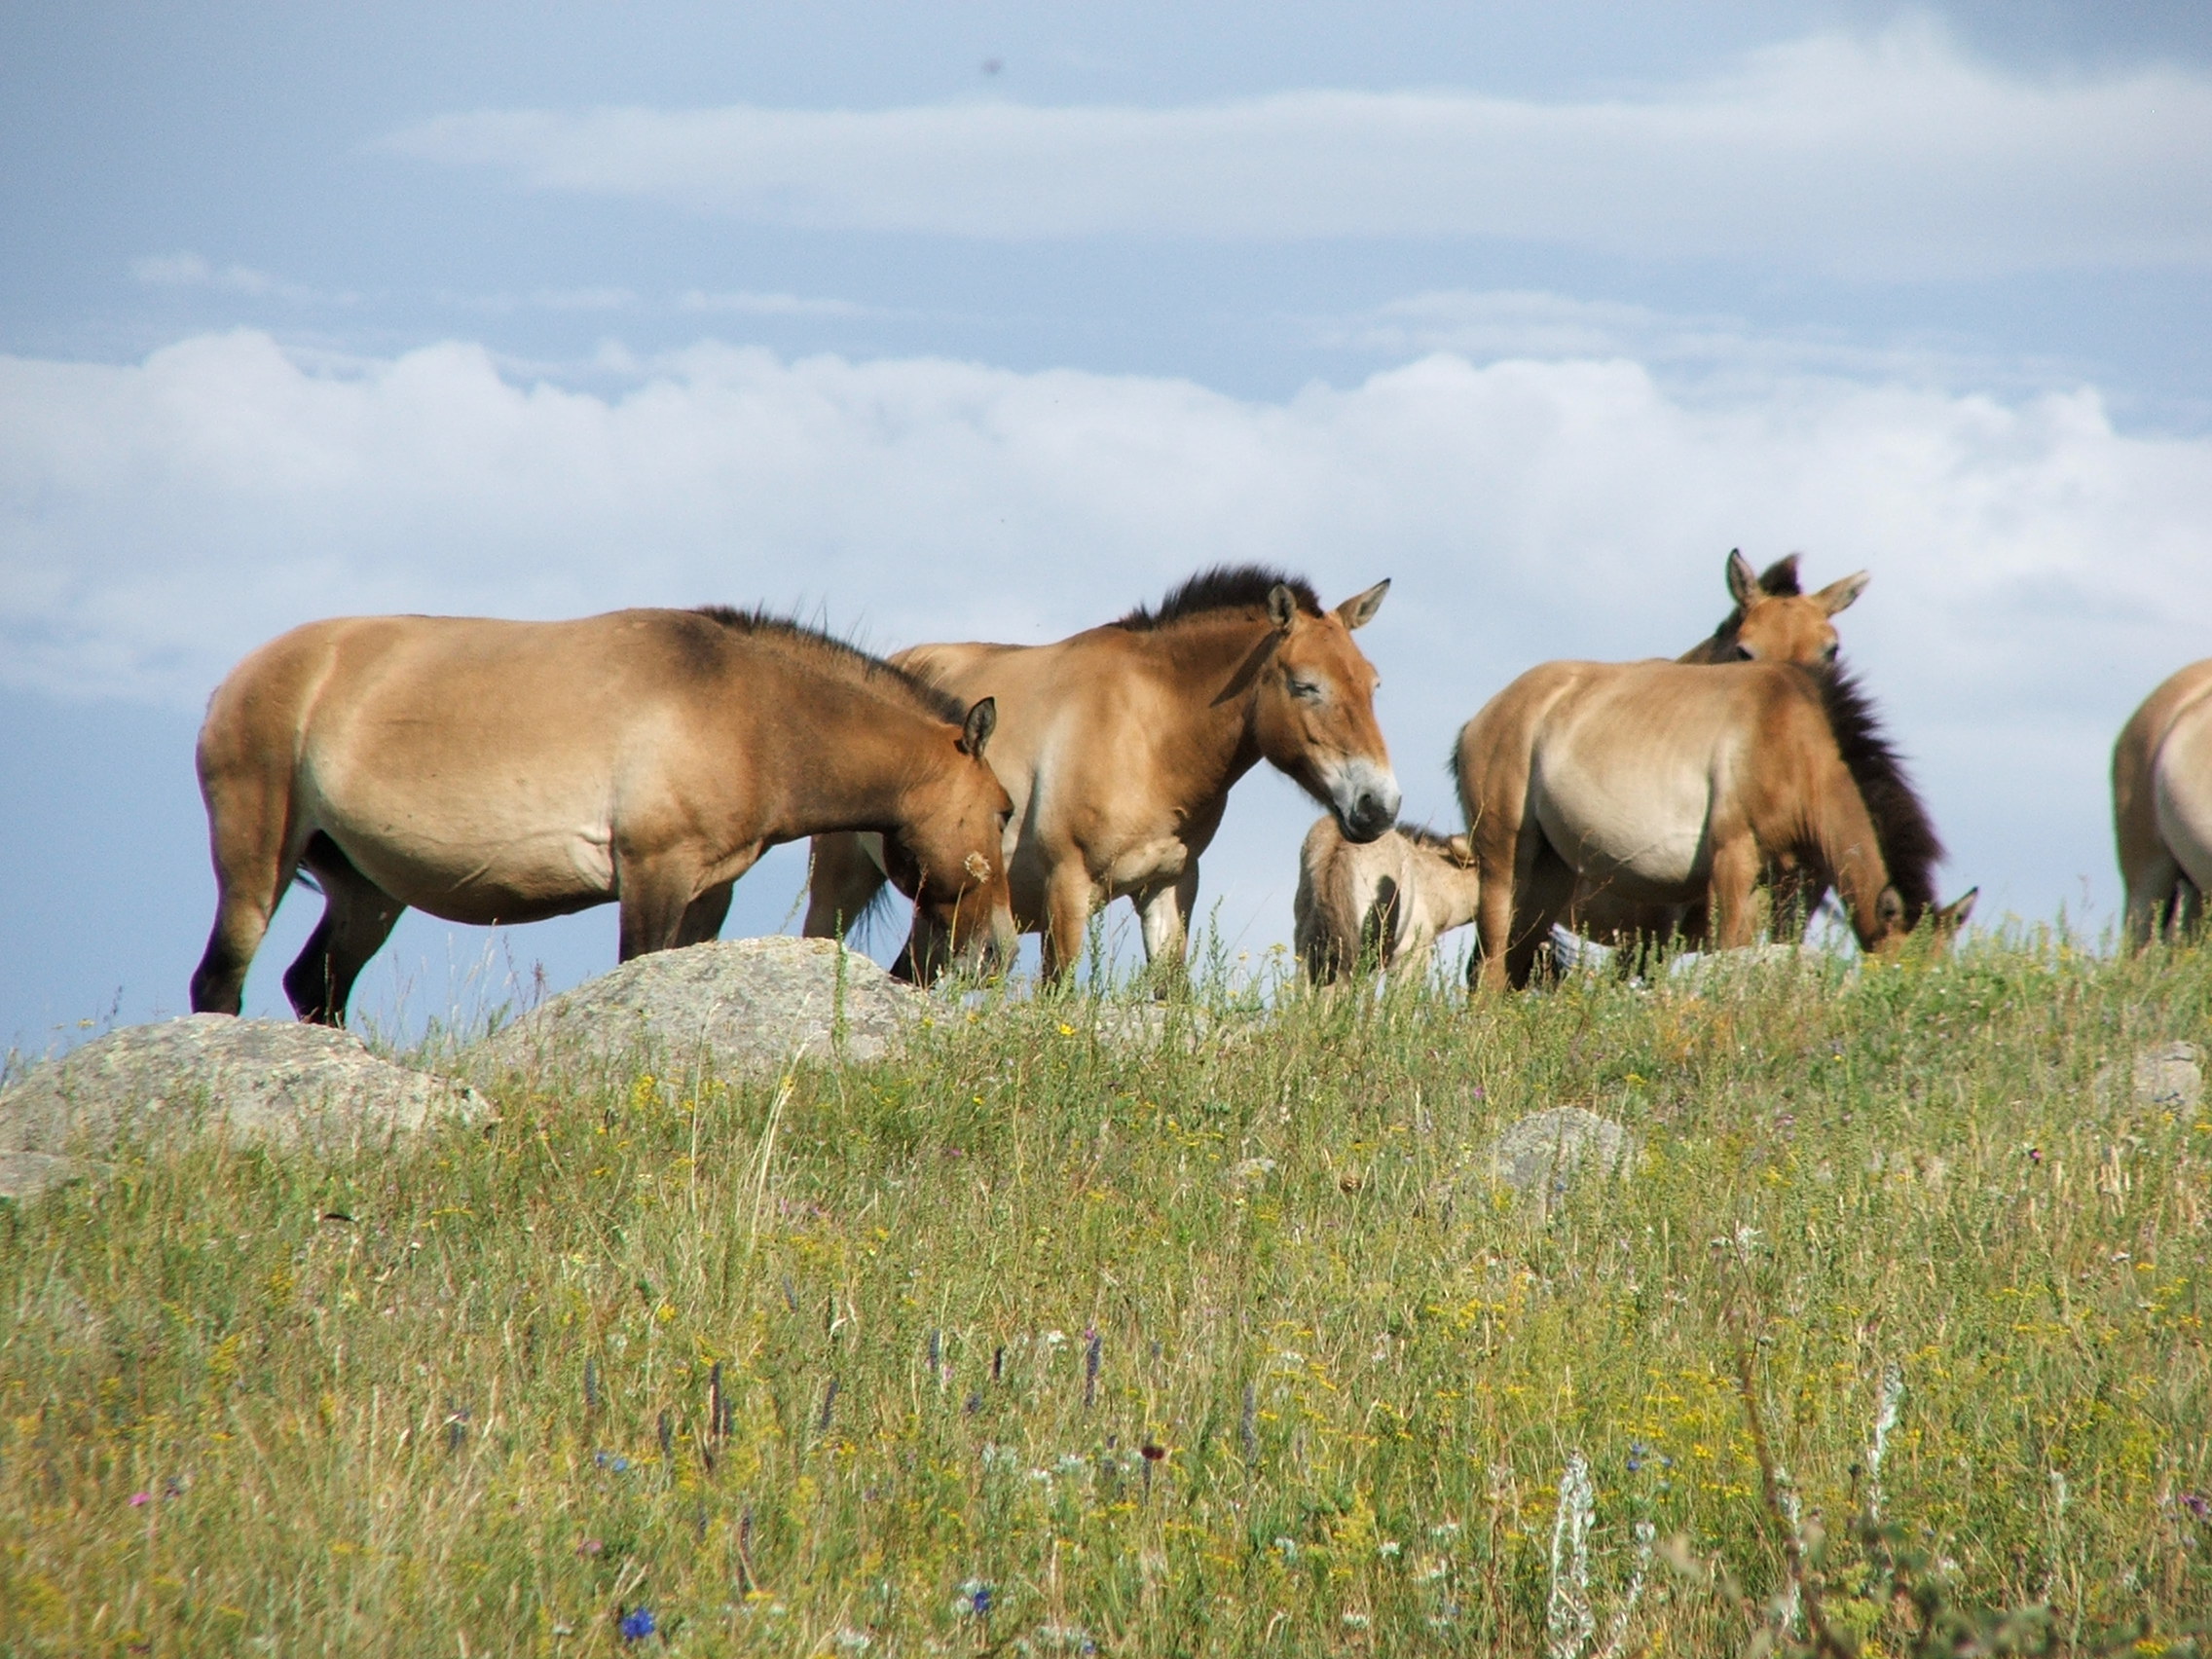 Mongolia is home to wild Takhi / Przewalski horses - a top fact about Mongolia